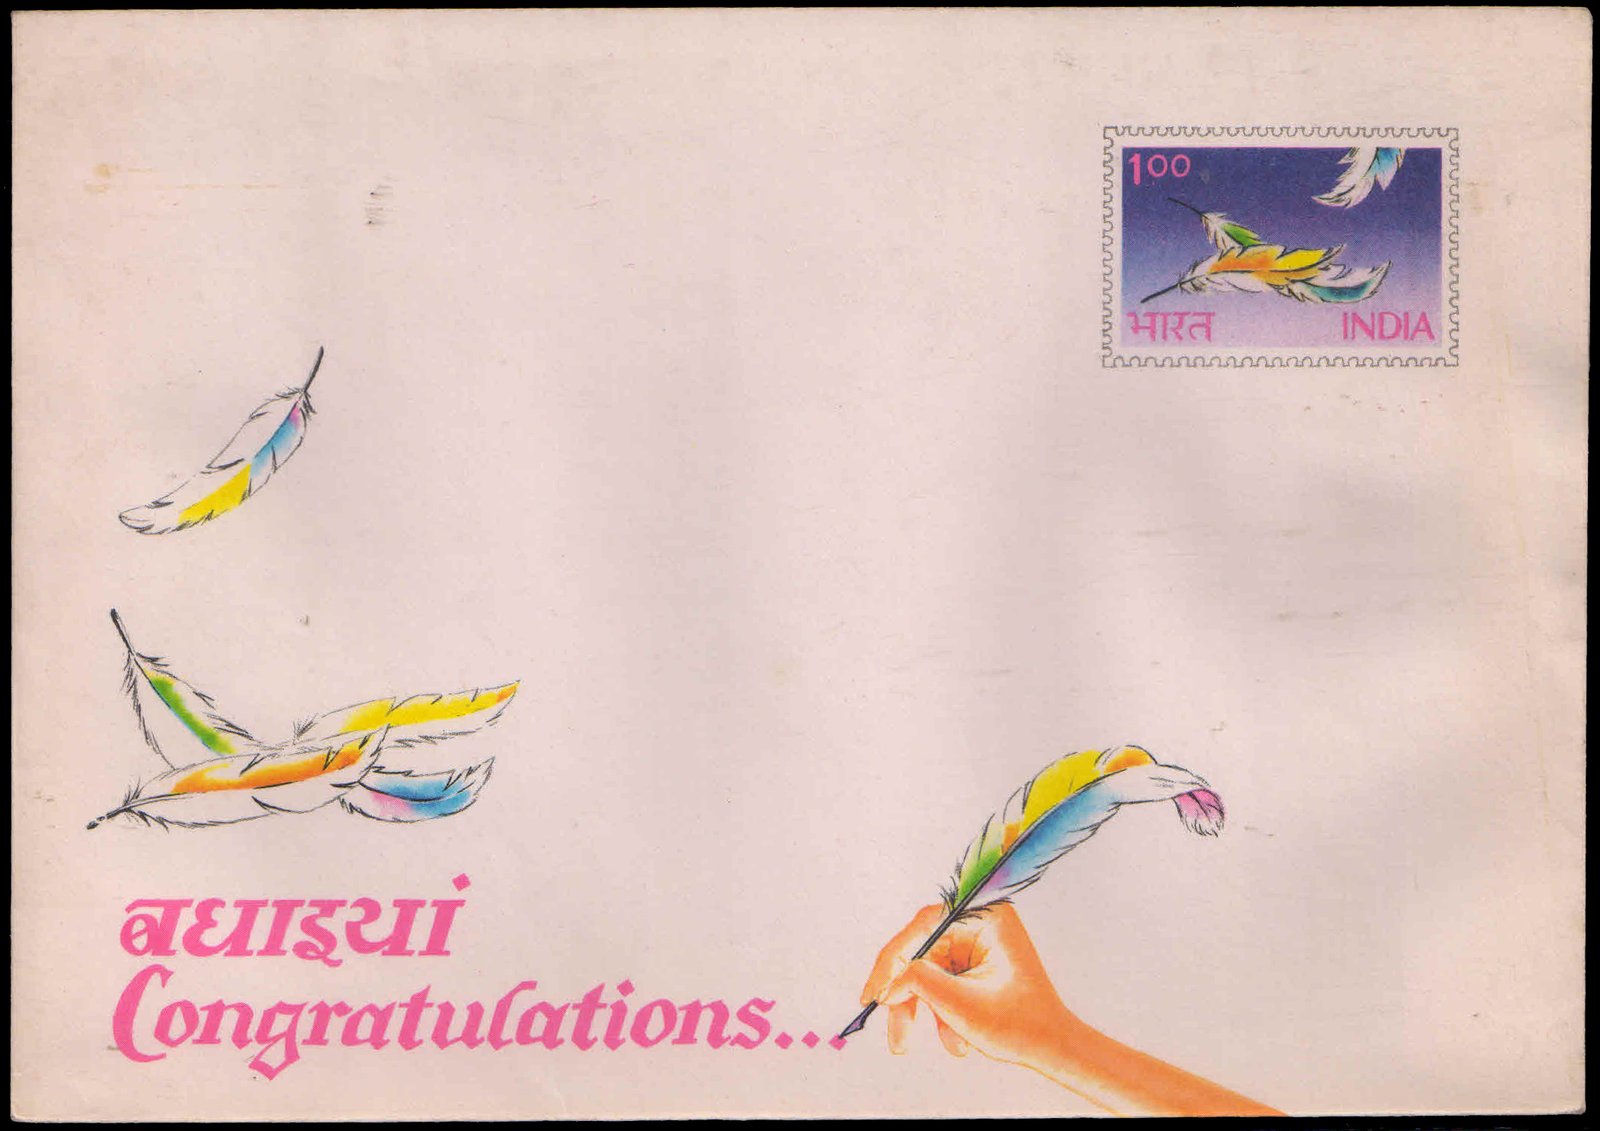 INDIA Greetings Envelope, Feathers, Issued by Postal Department, Condition as per scan